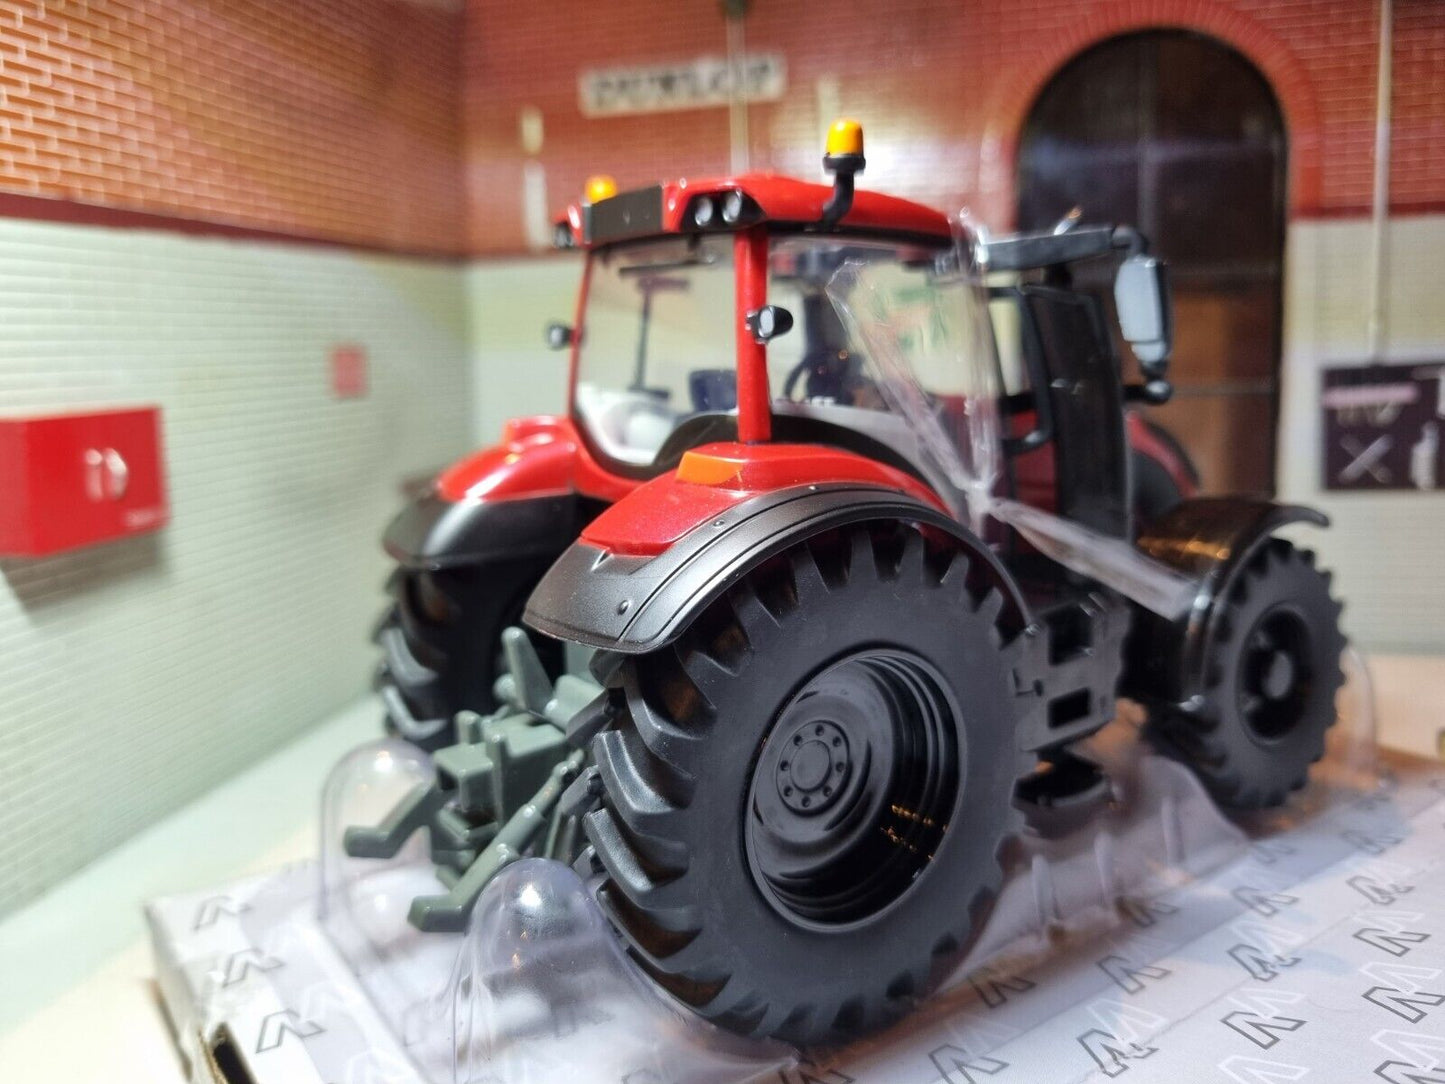 Valtra T254 70th Anniversary Limited Edition 43315 Britains 1:32